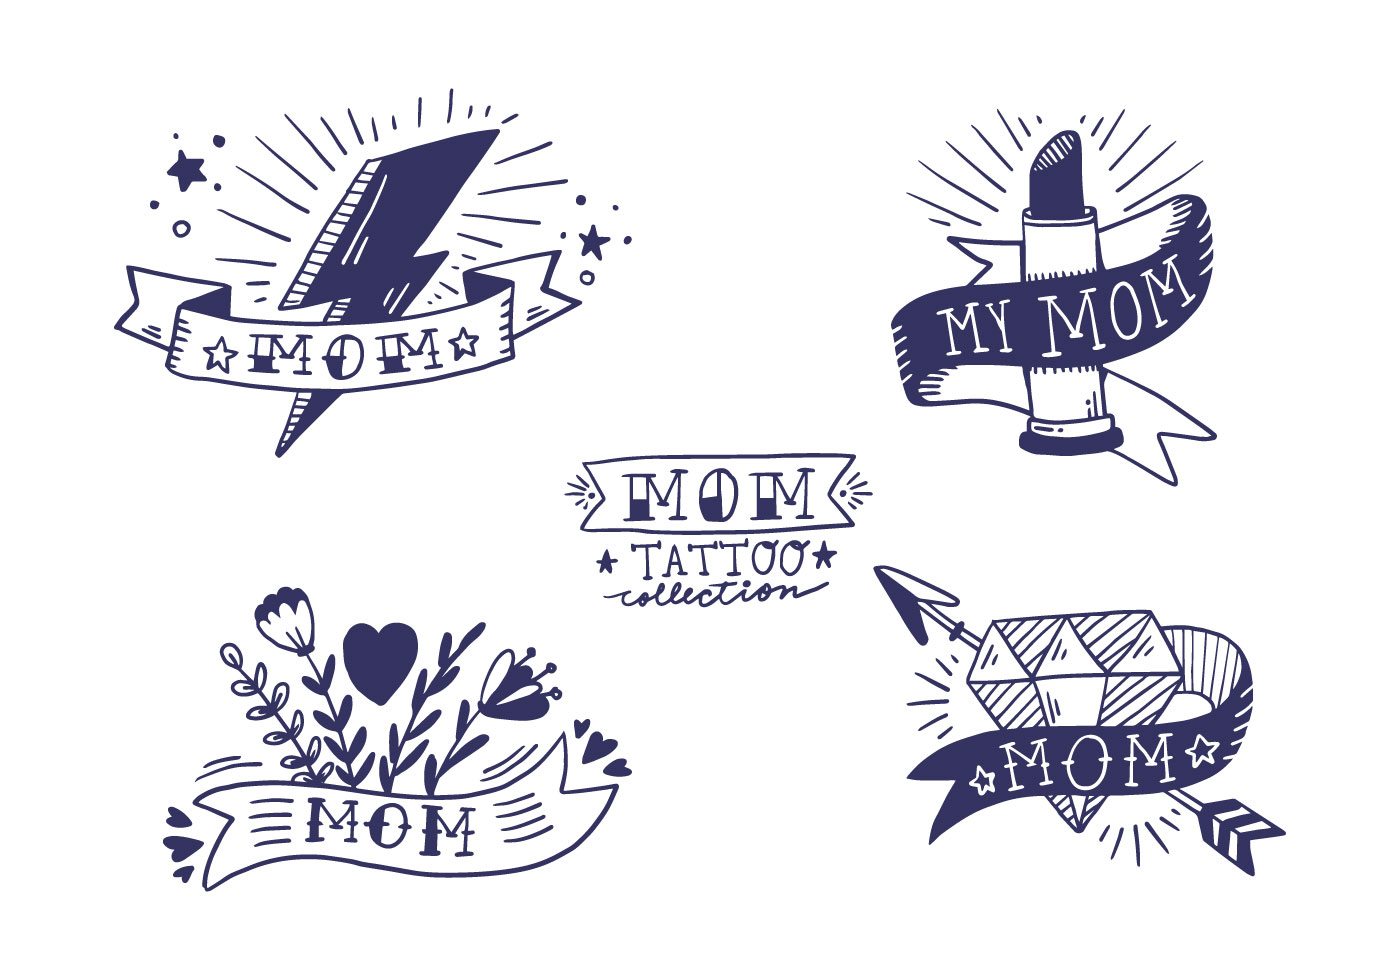 Download Free Mom Tattoo Collection - Download Free Vectors ...